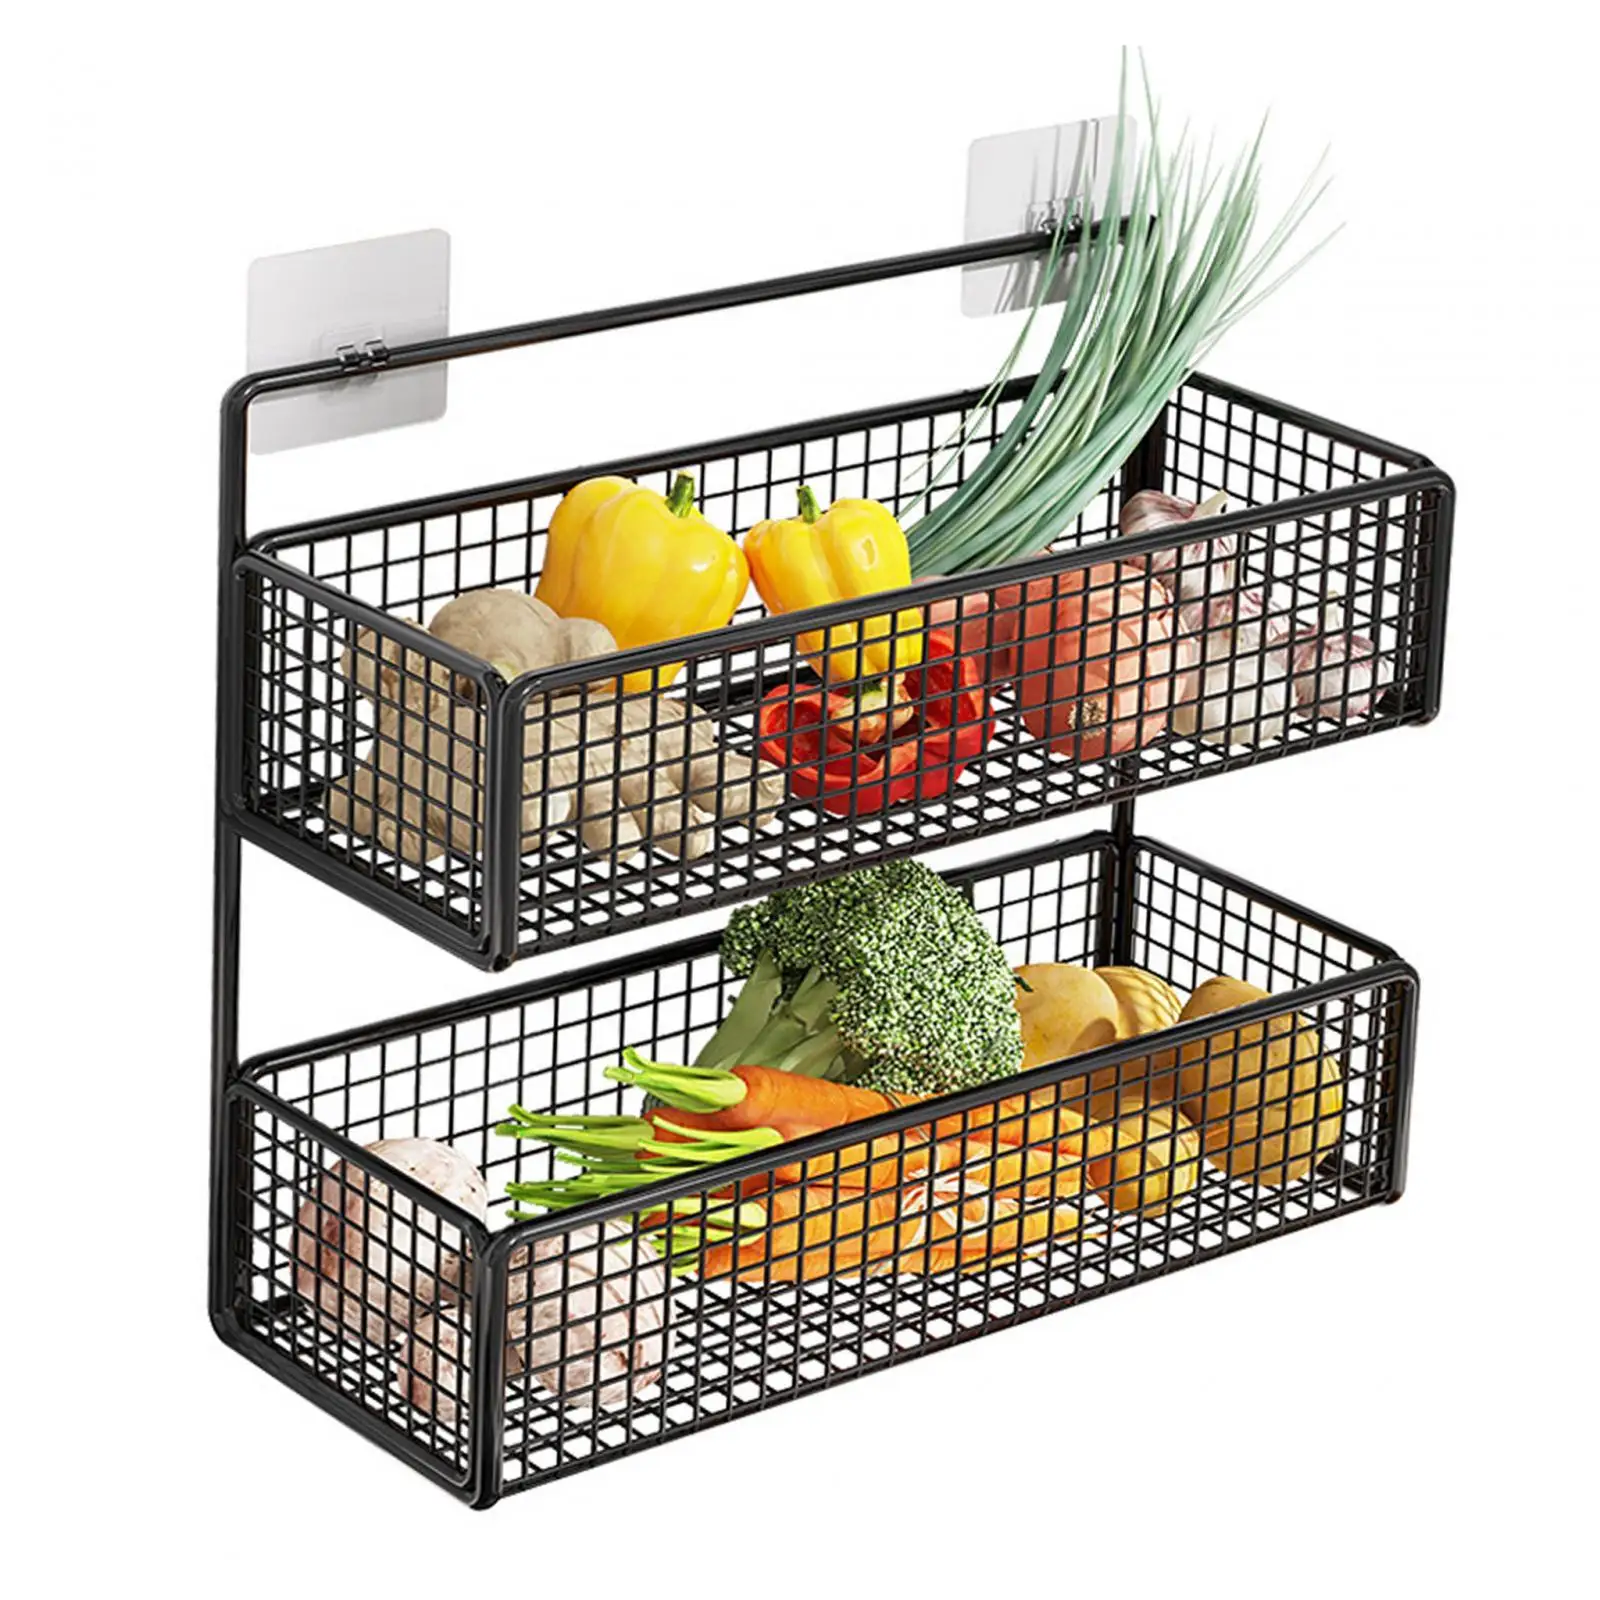 Spice Rack Organizer Wall Mounted Black Hanging Wall Organizer for Bathroom Fruits Vegetables Snacks Kitchen Home Crafts Room